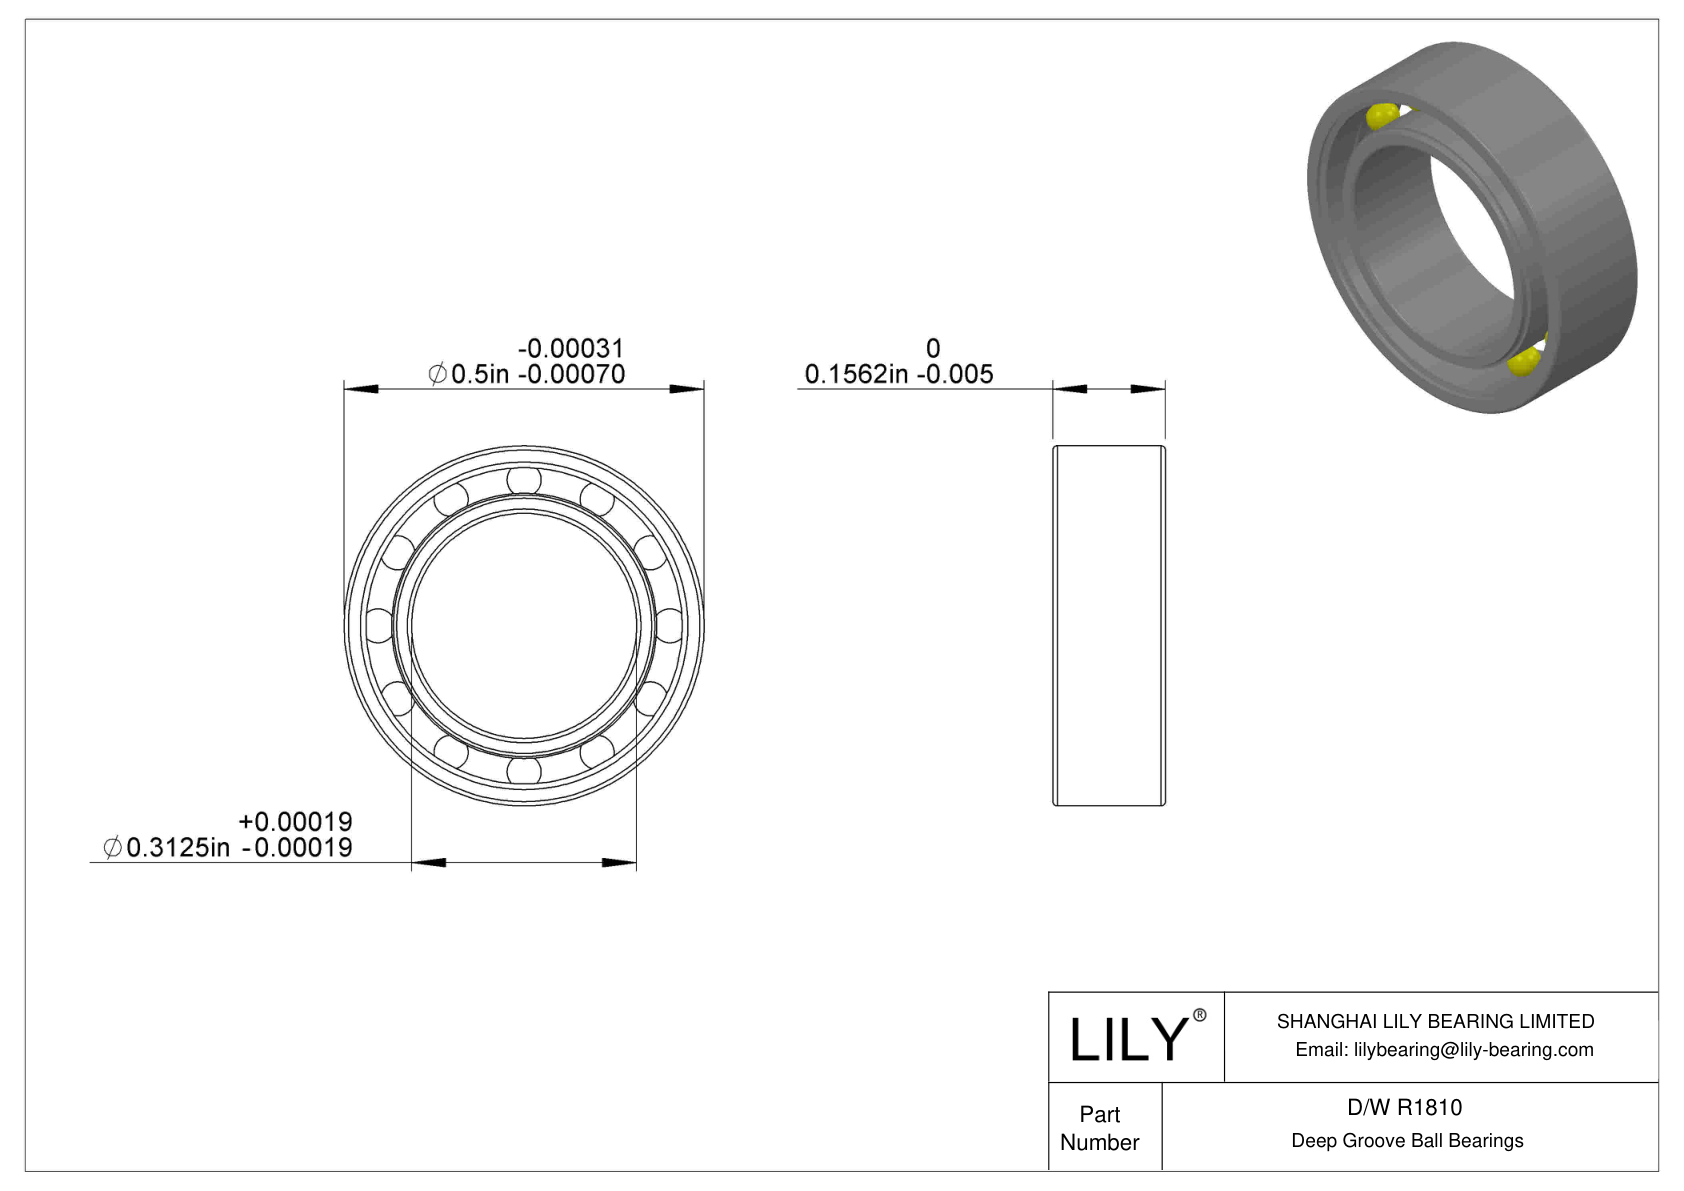 D/W R1810 Stainless Steel Deep Groove Ball Bearings cad drawing